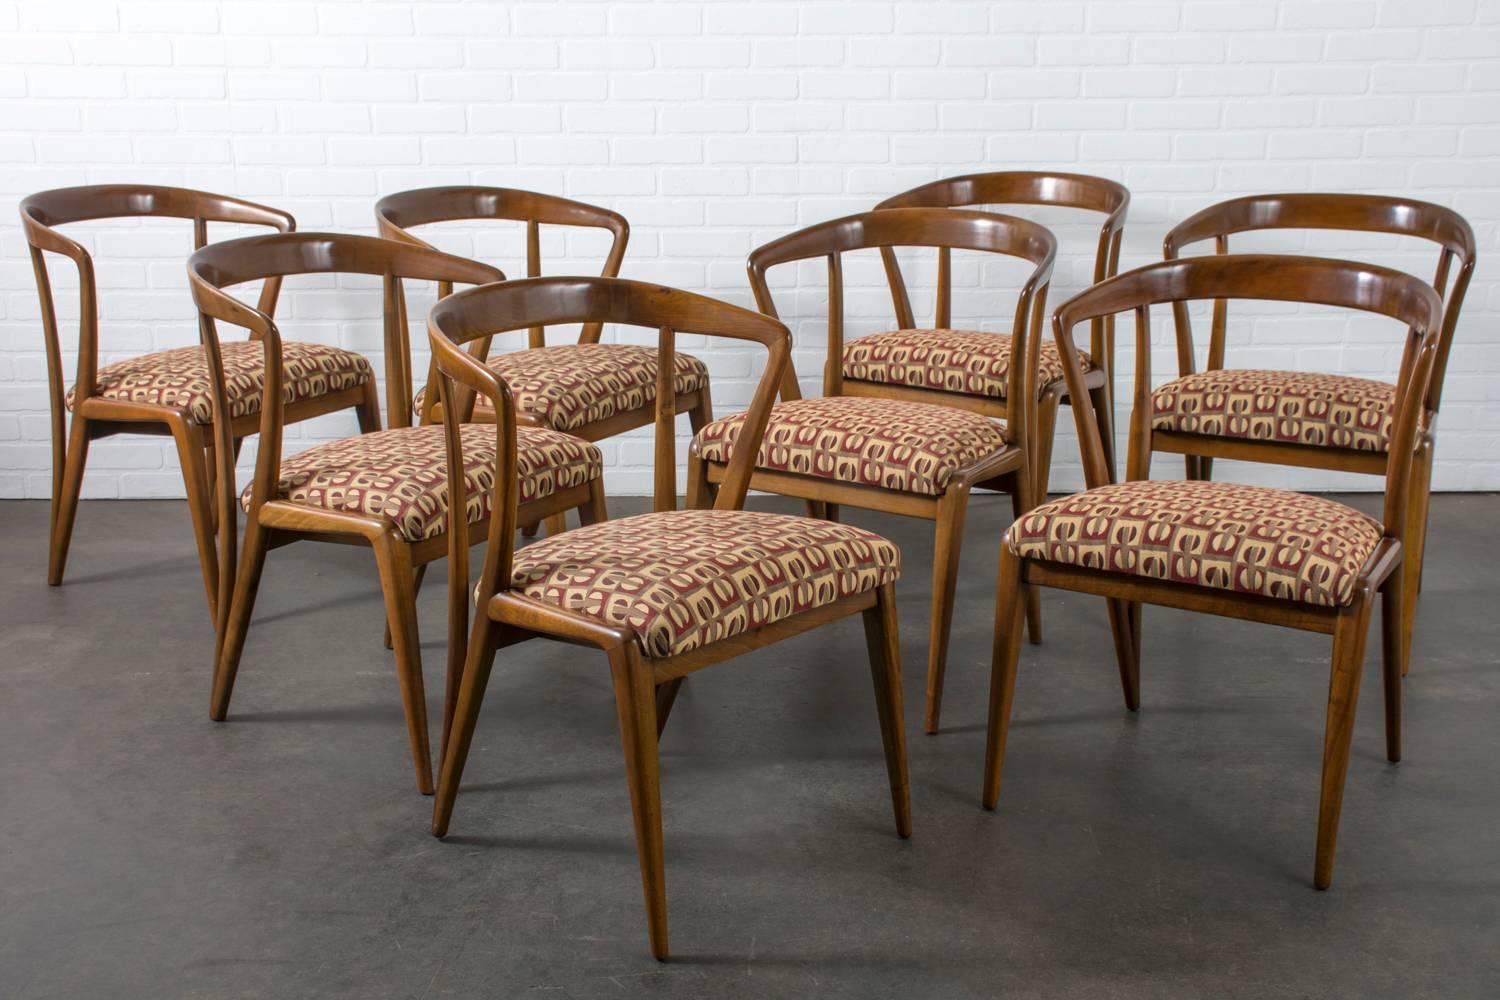 These Mid-Century Modern dining chairs were designed by Bertha Schaefer (American, 1895-1971) and produced for Singer and Sons, USA, circa 1950s. They have sculptural solid walnut frames and vintage upholstery.